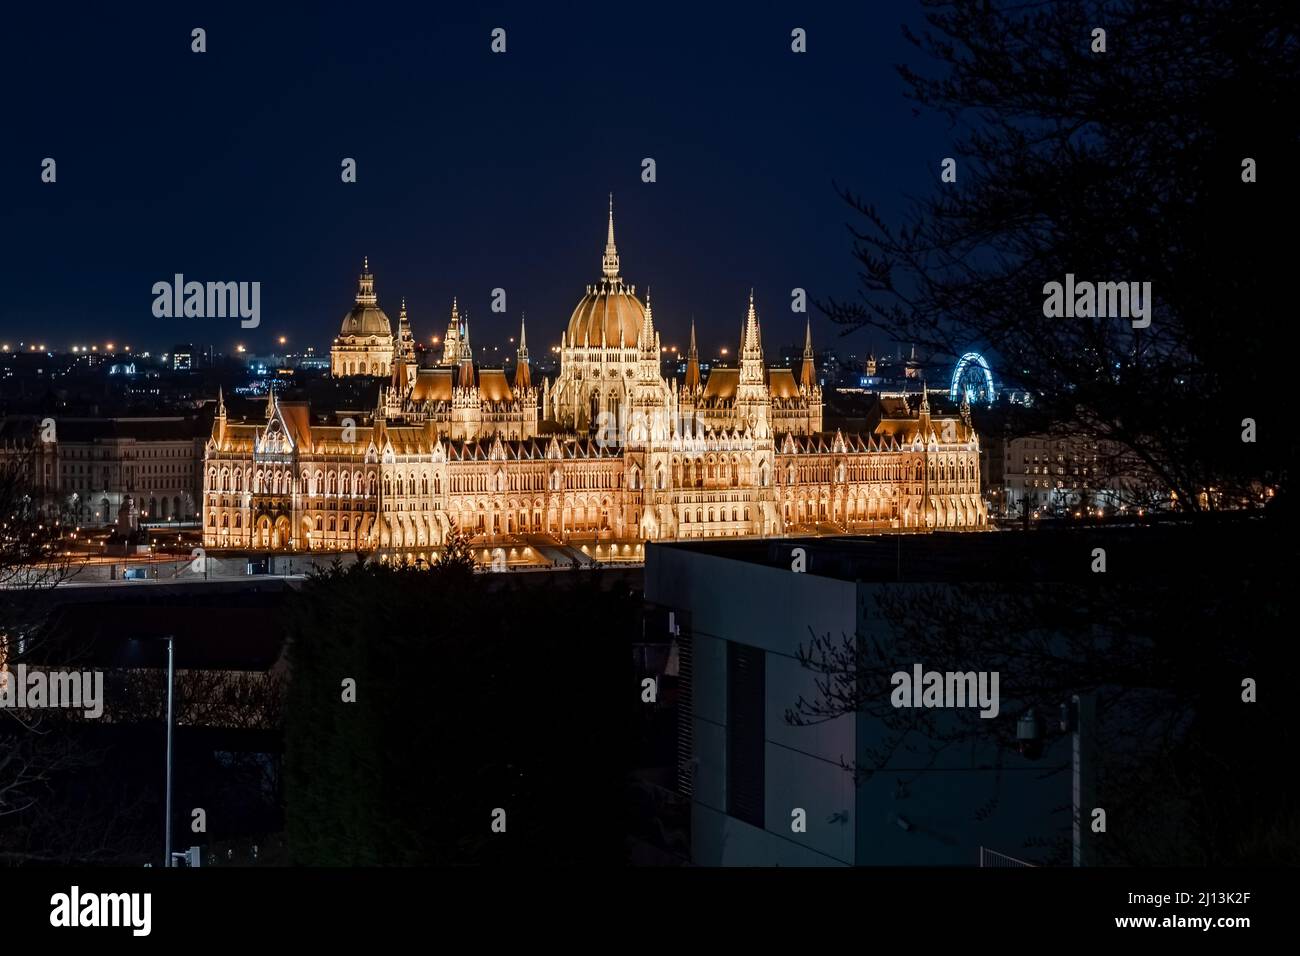 unuque wiev about the Hungarian parliament's building. St Stephen basilica tower on the background and budapest eye ferris wheel on the right side Stock Photo